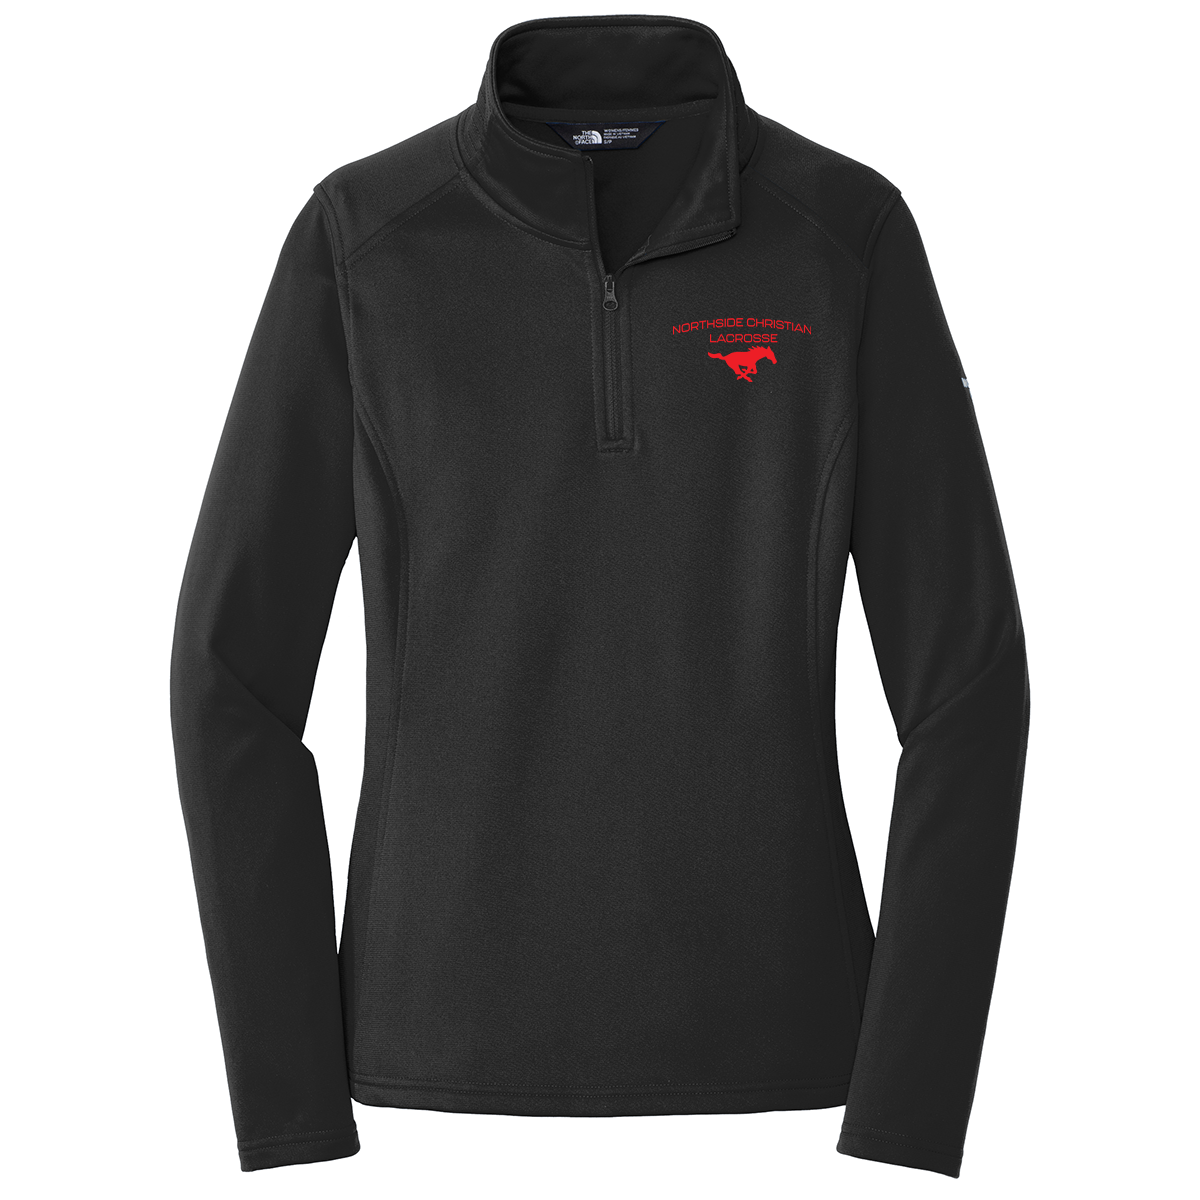 Northside Christian High School Lacrosse The North Face Ladies Tech 1/4 Zip